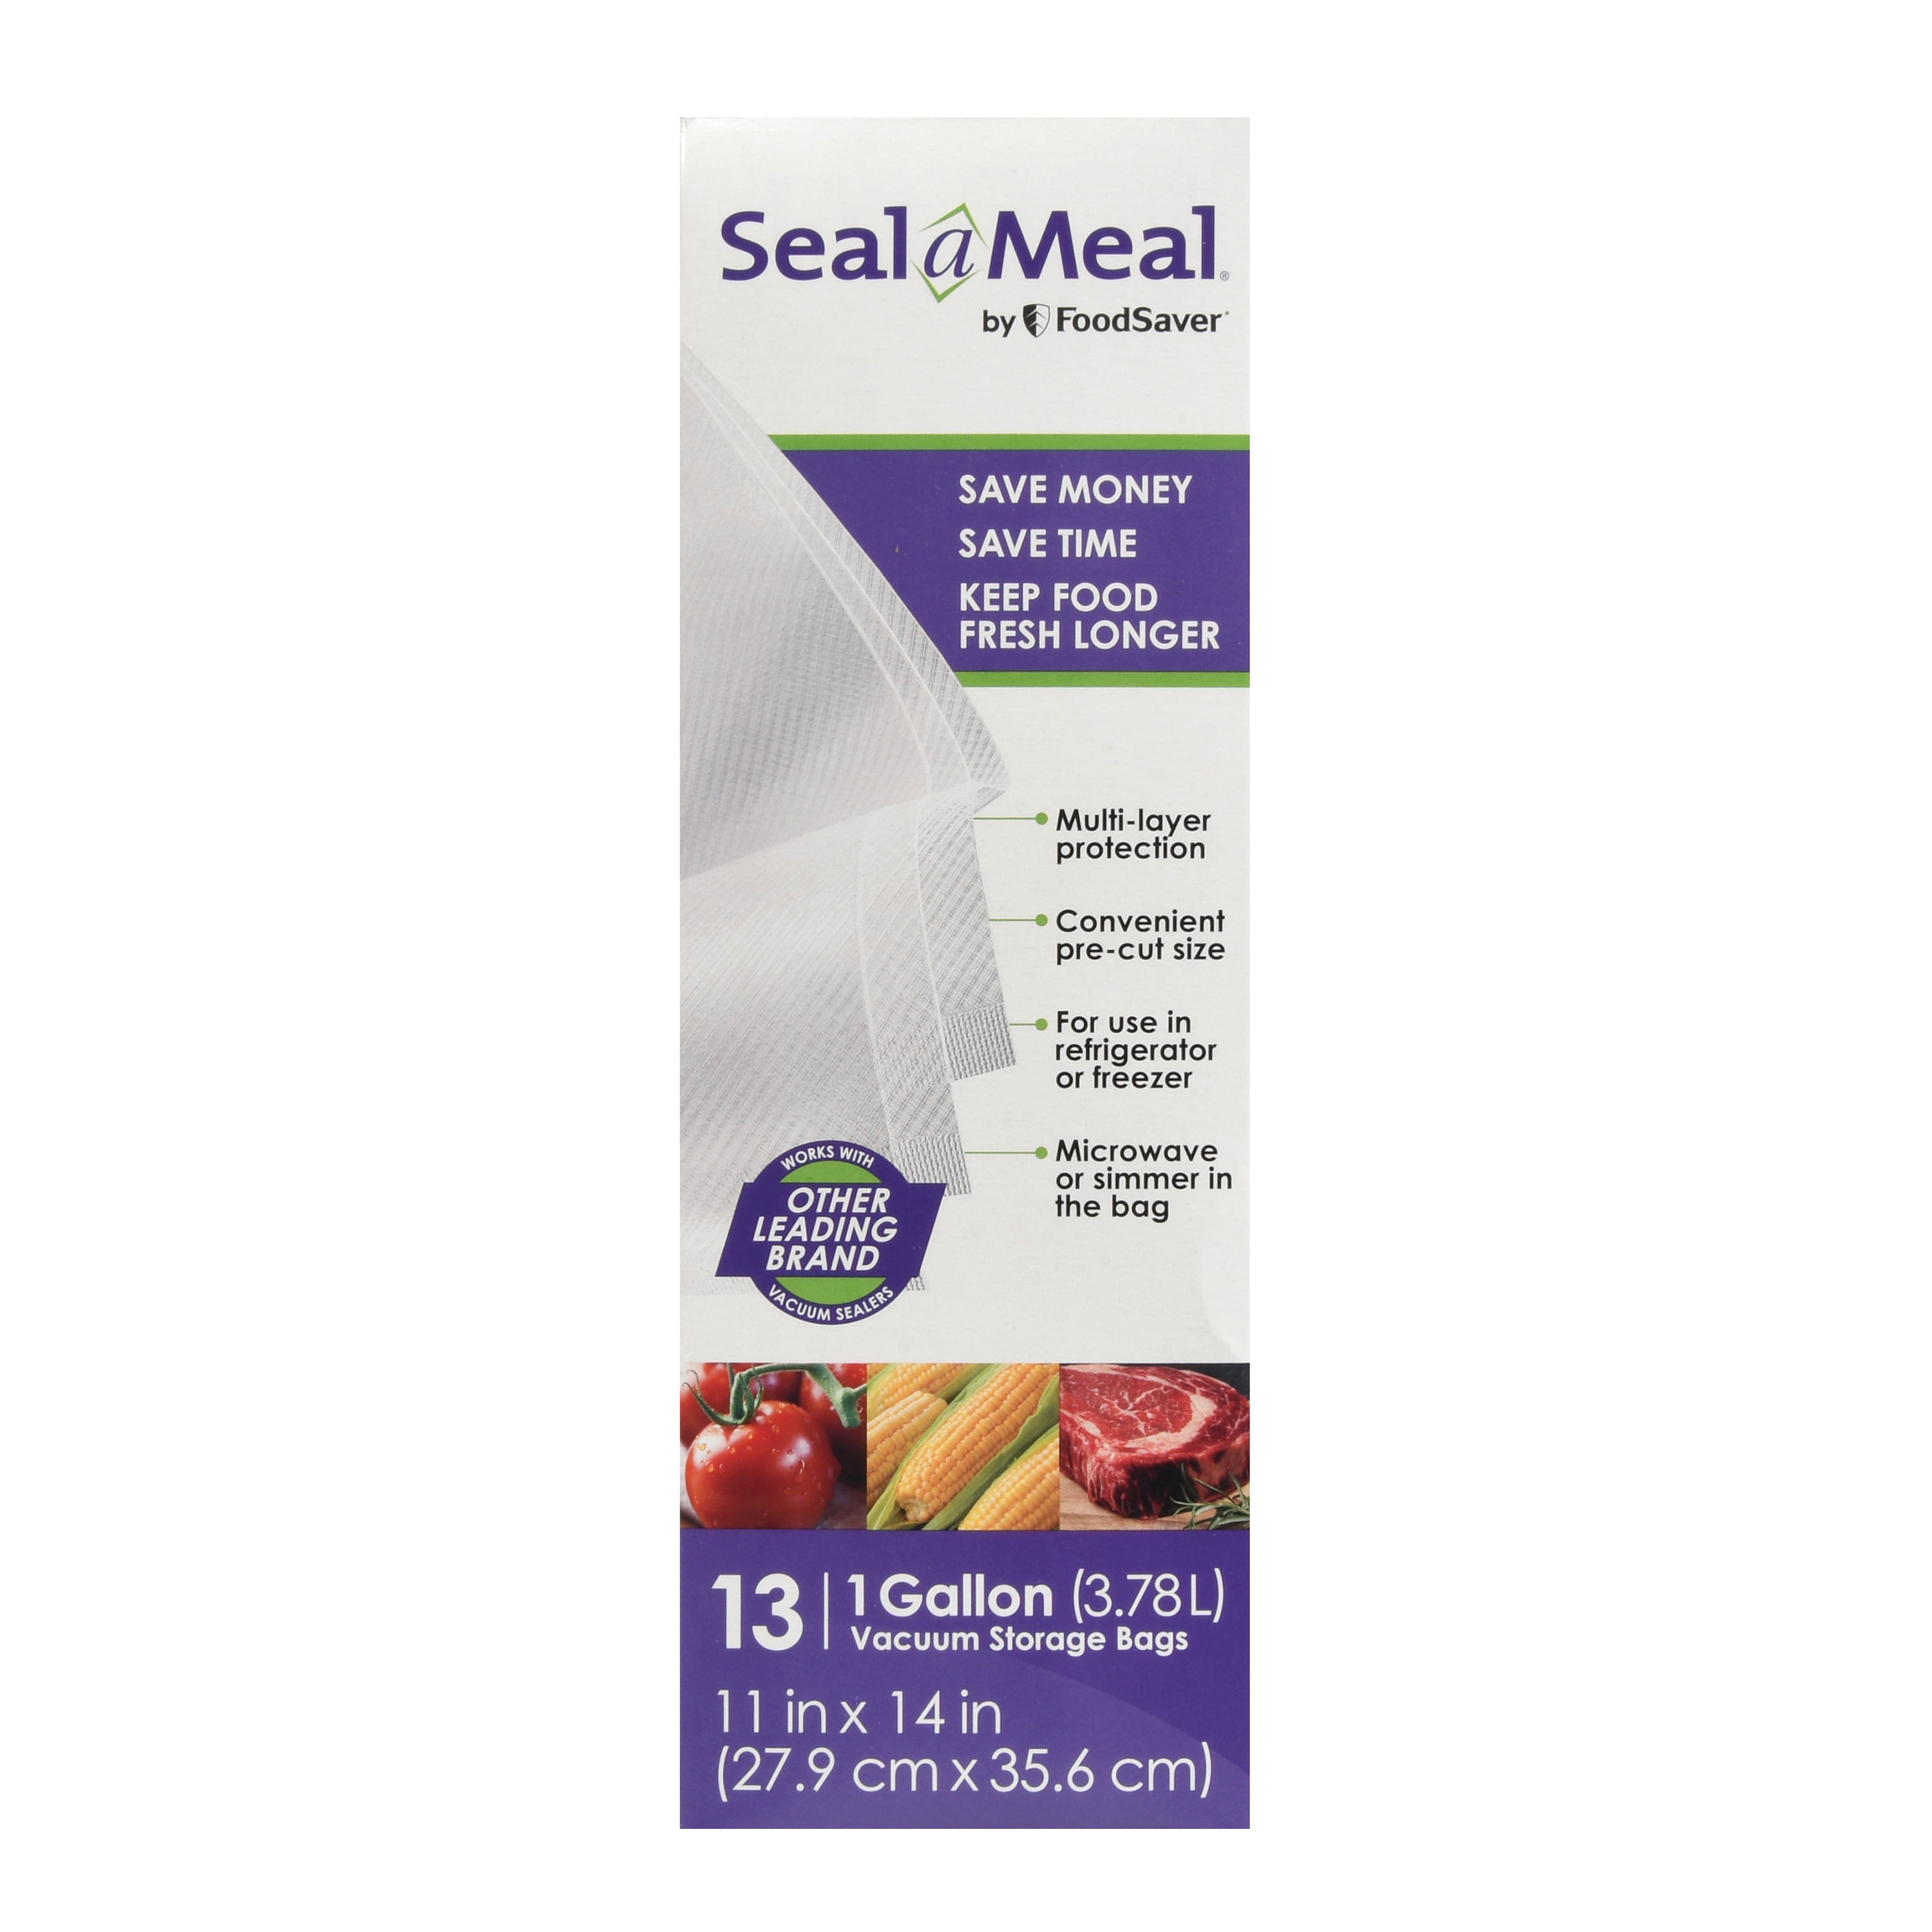 Seal-a-meal 1-Gallon Vacuum Seal Bags for Seal-a-meal and Foodsaver Vacuum Sealers, 13 Pack